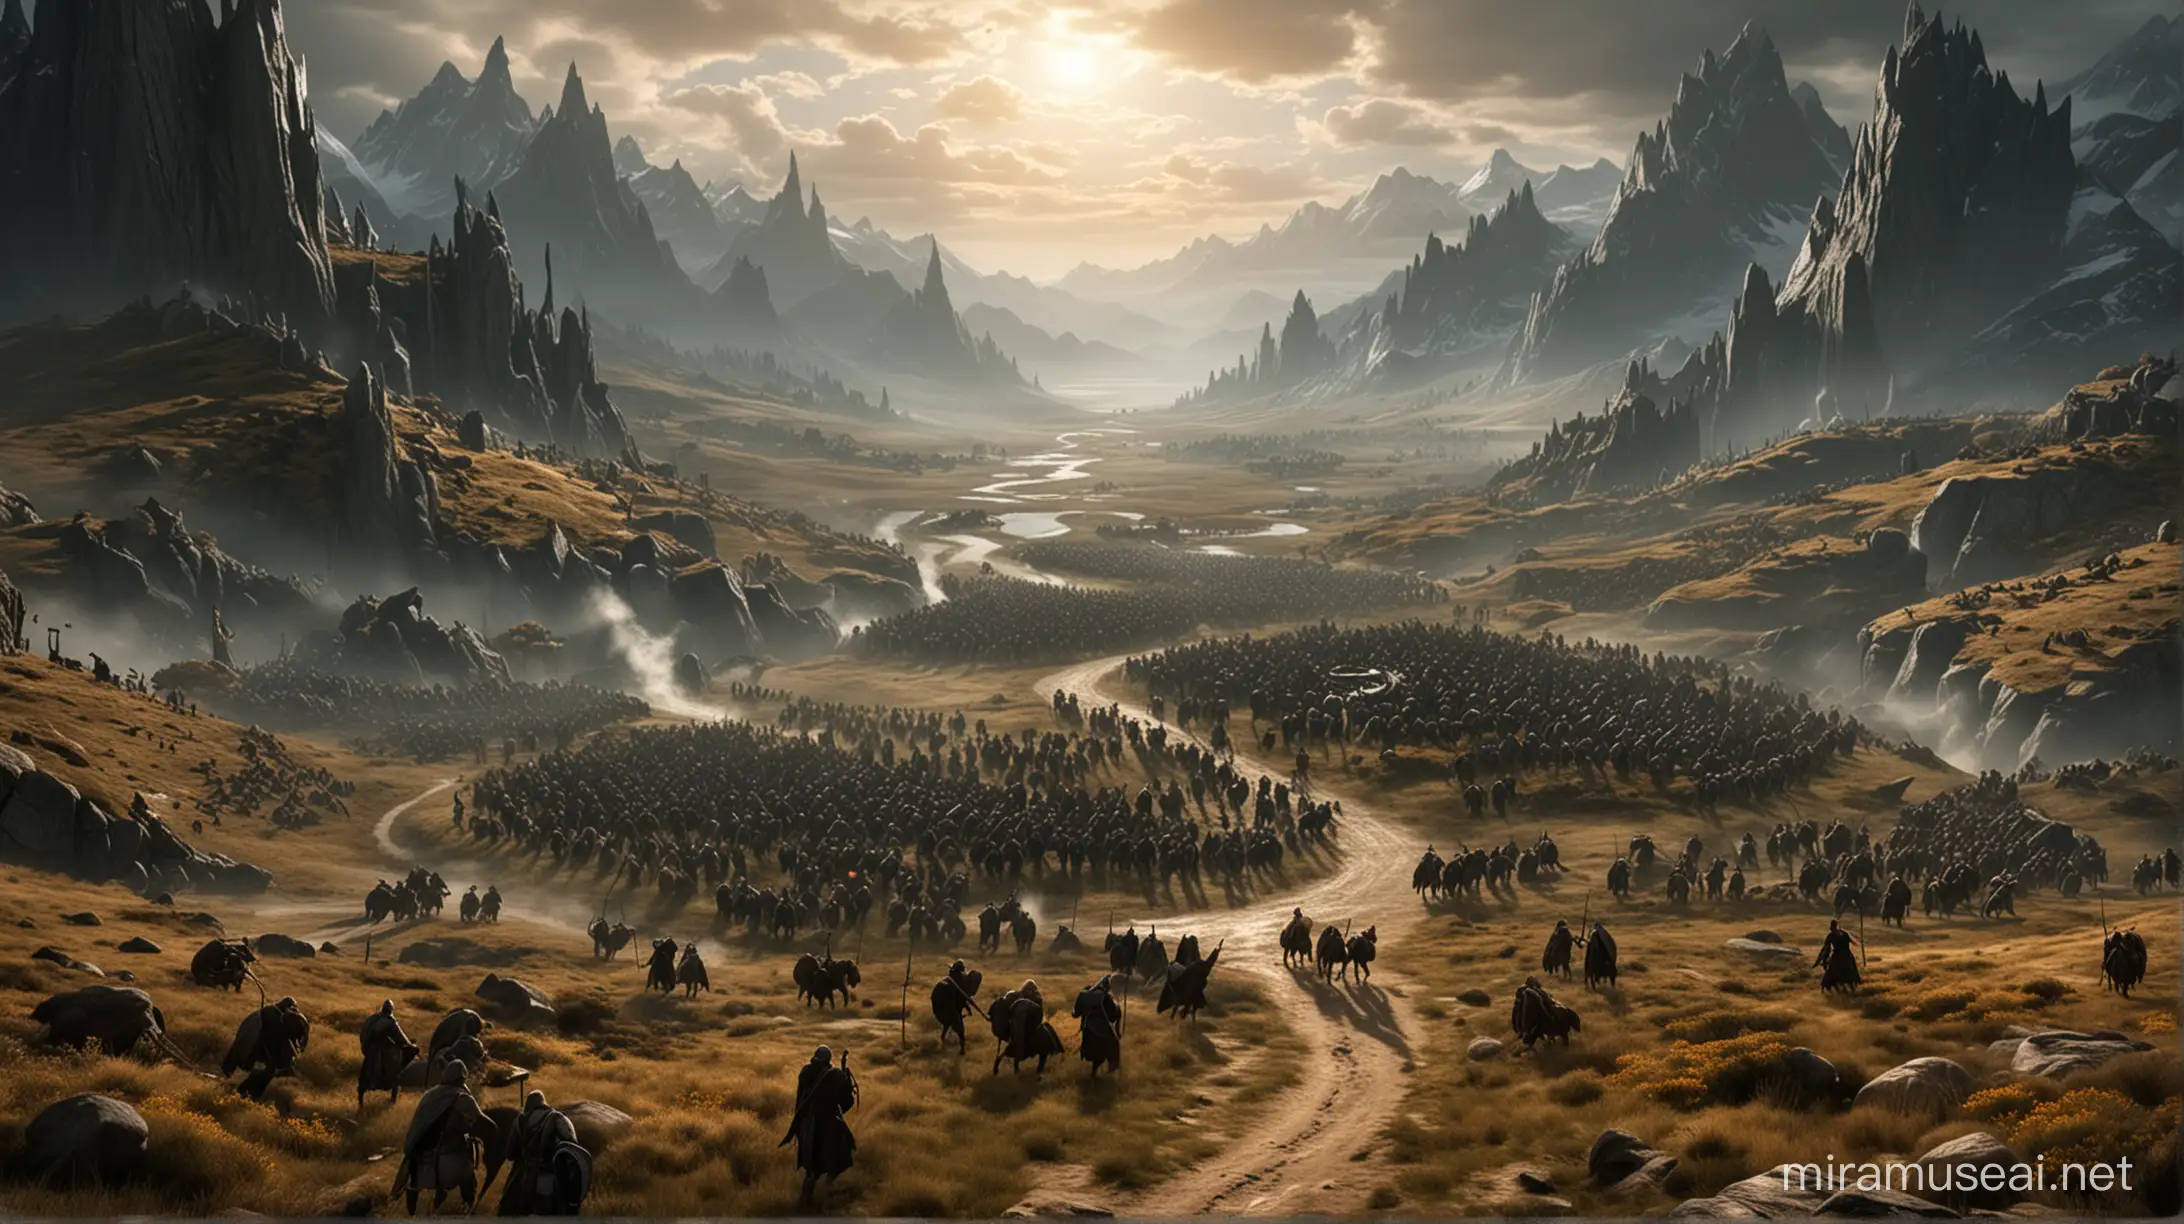 Epic RealTime Strategy Game Set in the World of Lord of the Rings